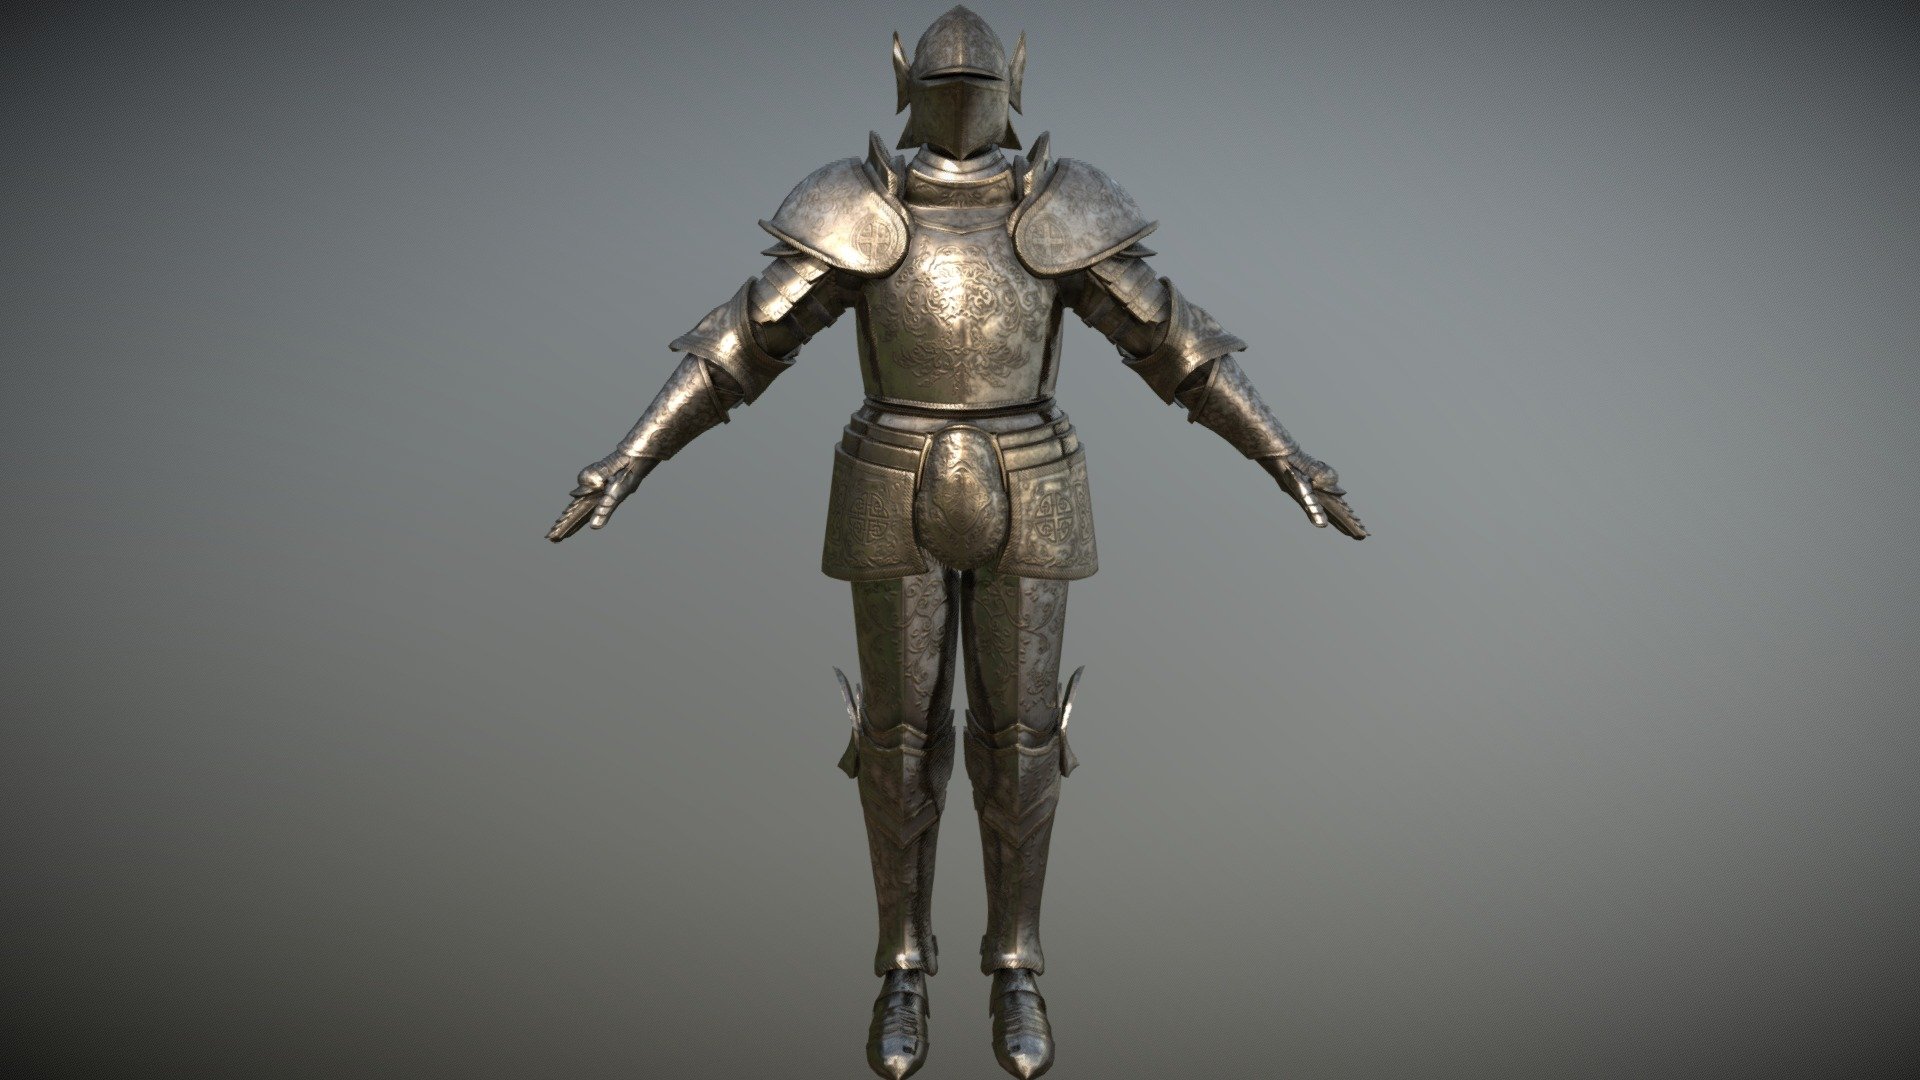 Inspired by Elden Ring and medieval armors - Engraved Knight Armor - 3D model by Autonarch 3d model